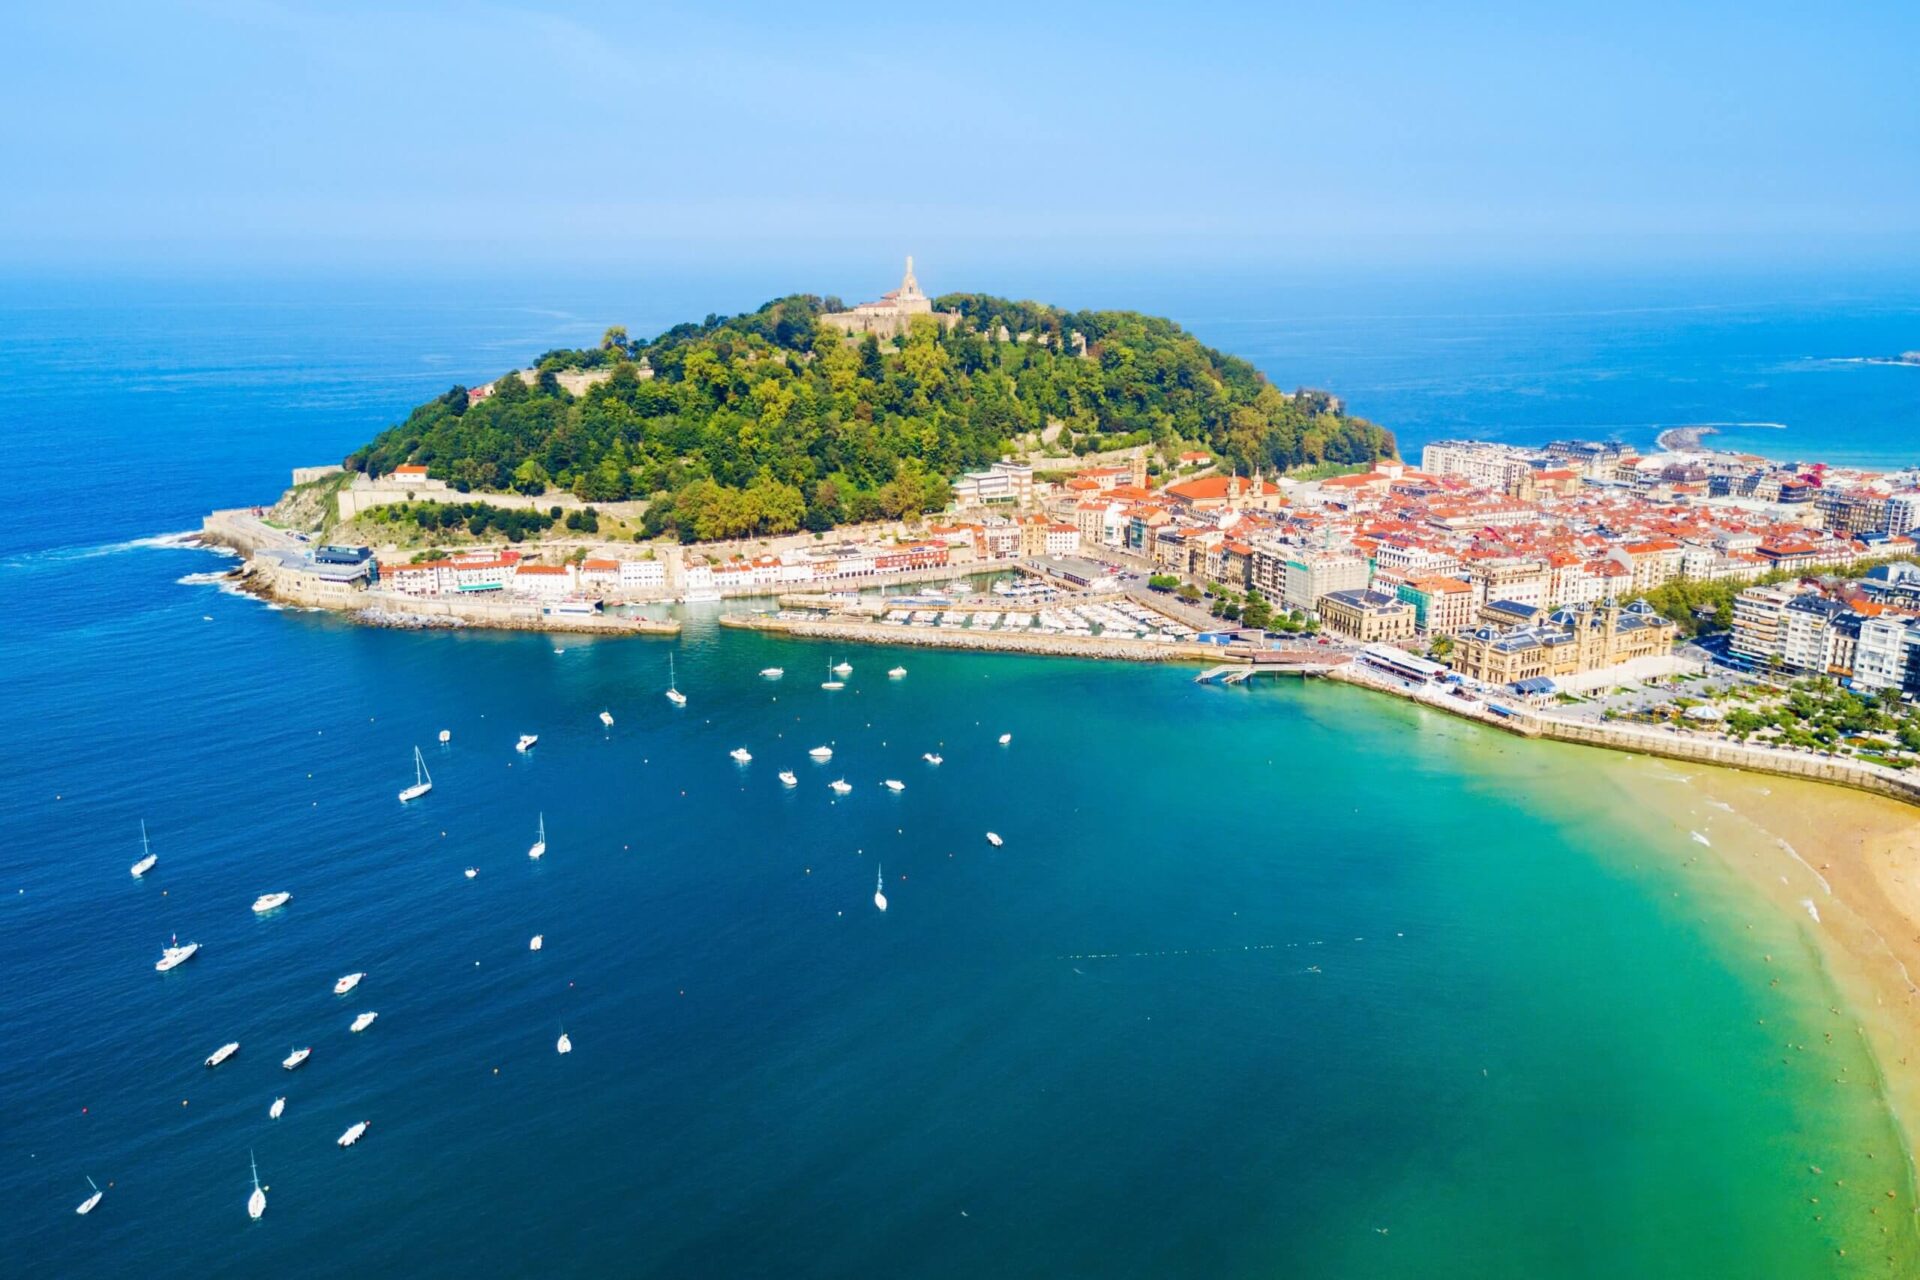 san-sebastian-or-donostia-aerial-panoramic-view-san-sebastian-is-a-coastal-city-in-the-basque-country-in-spain-stockpack-istock